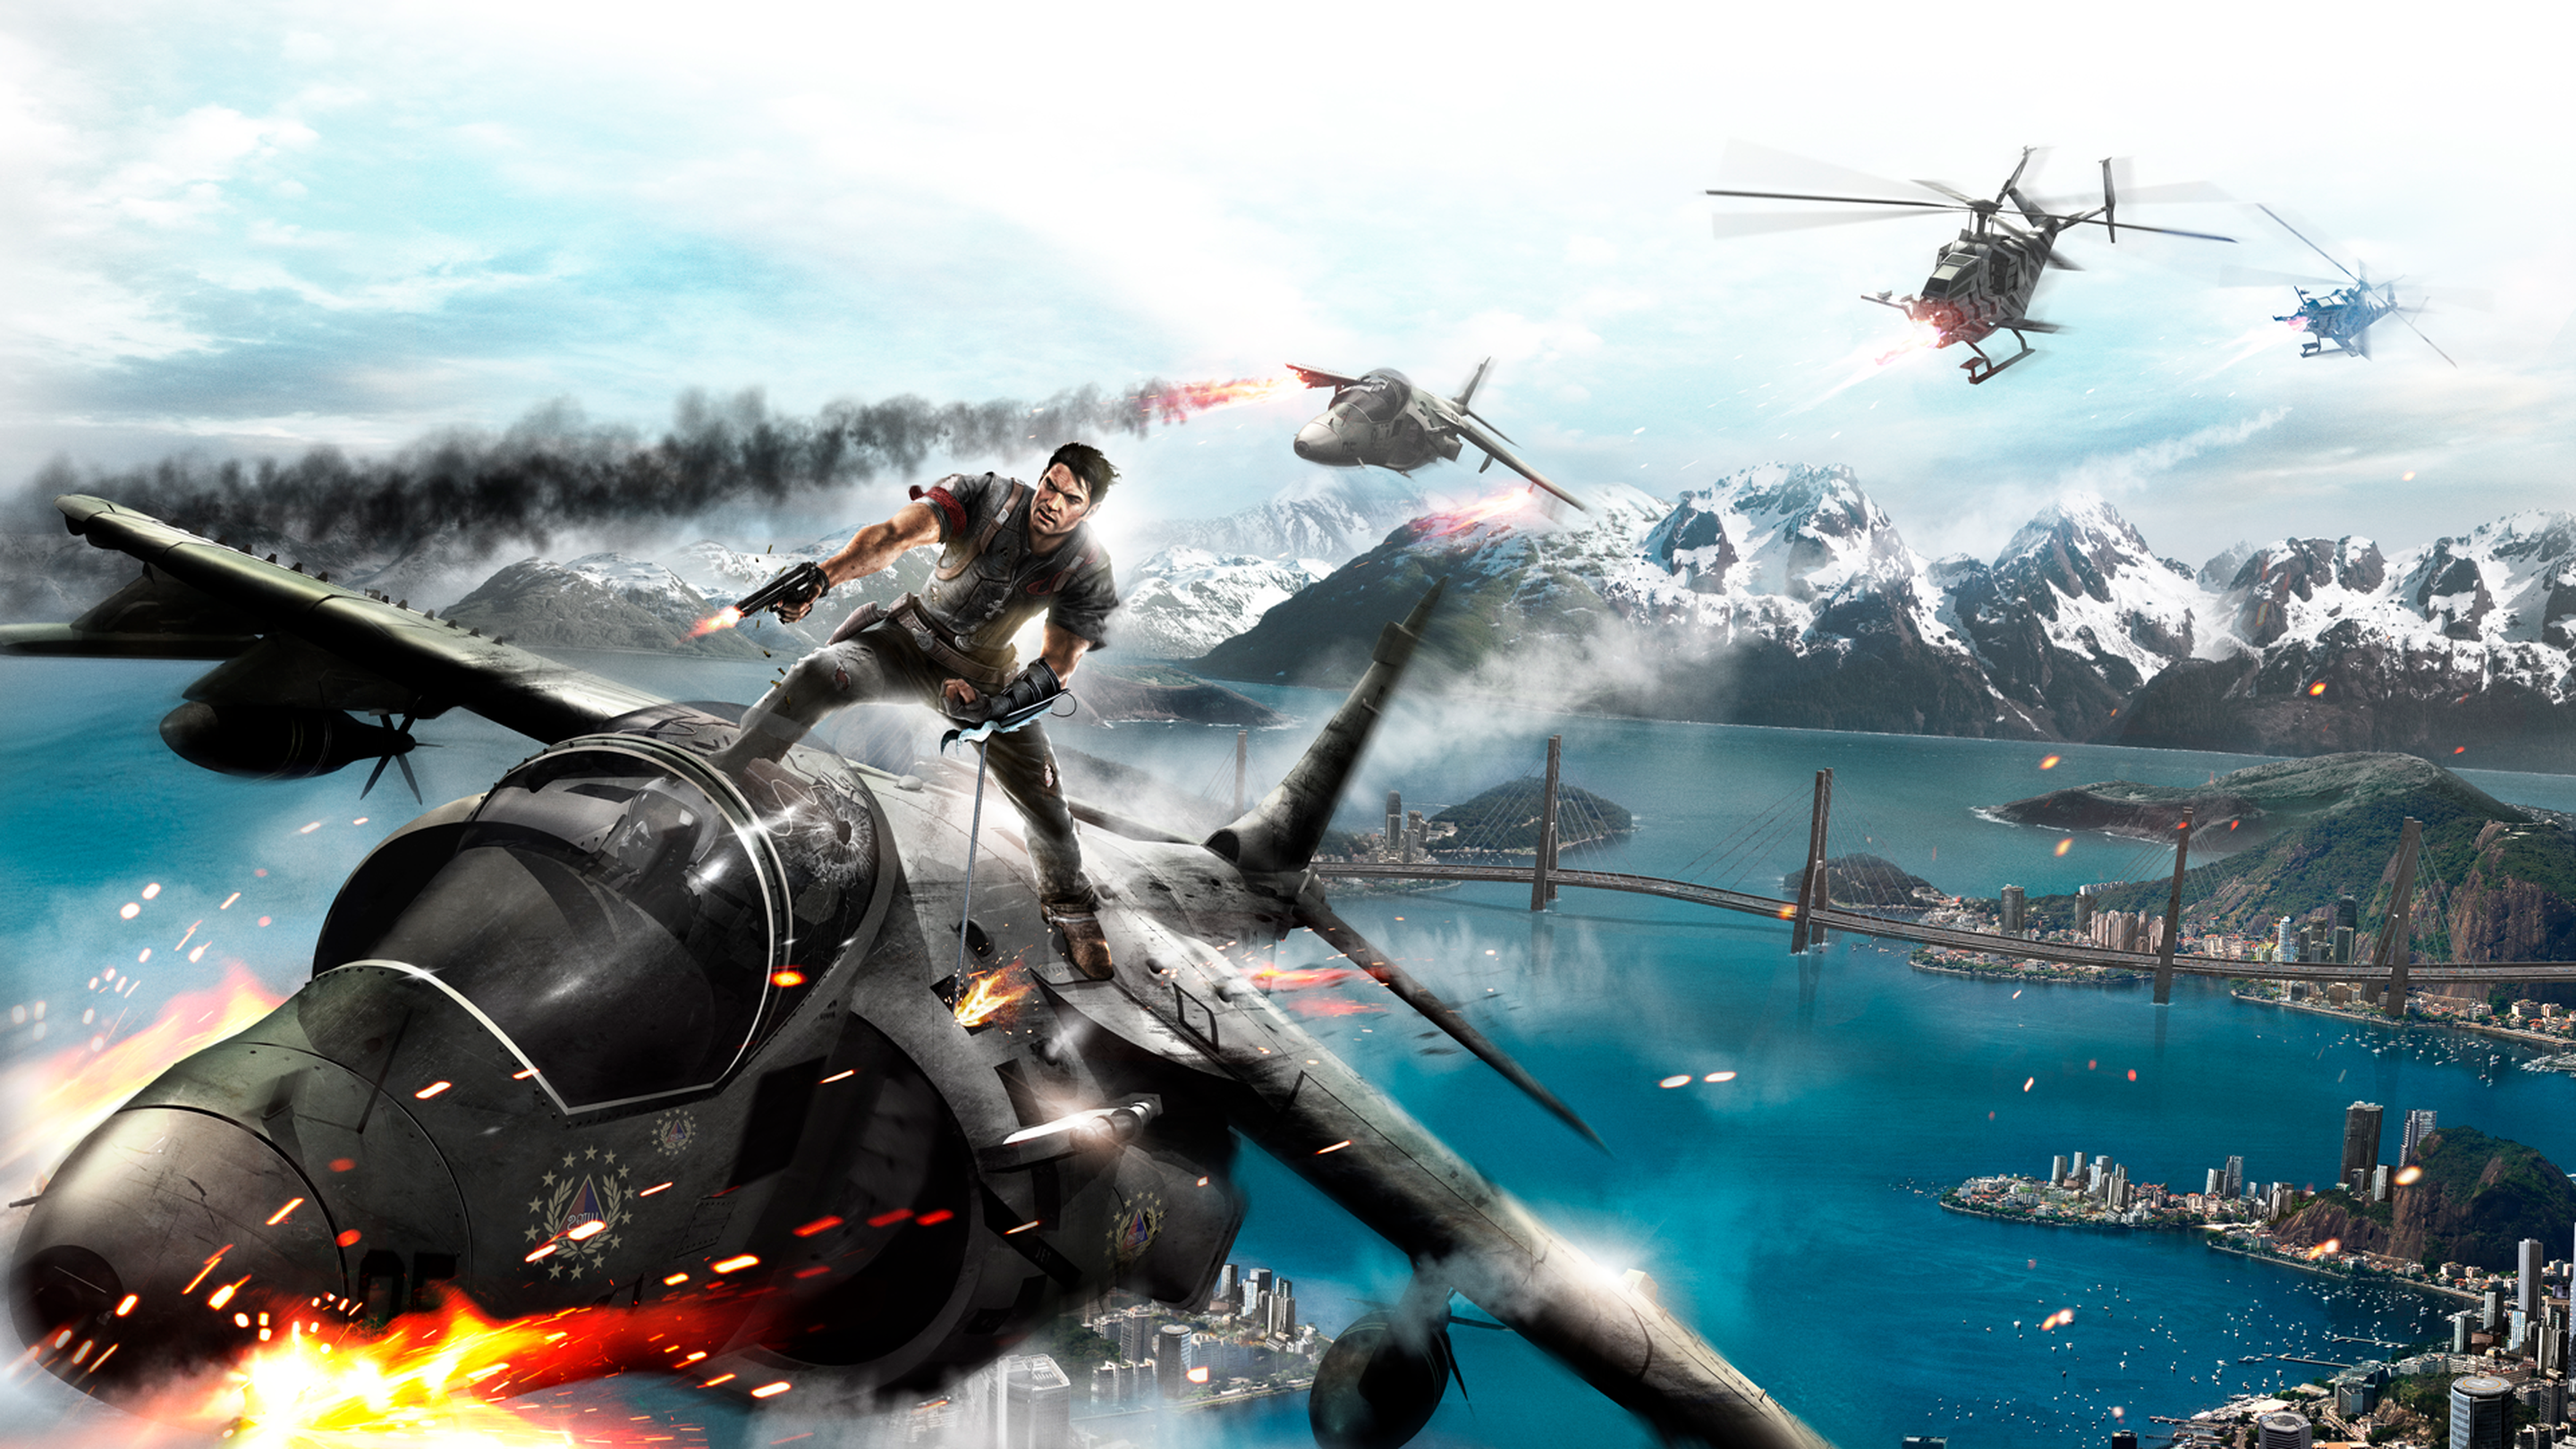 just cause 2 release dates